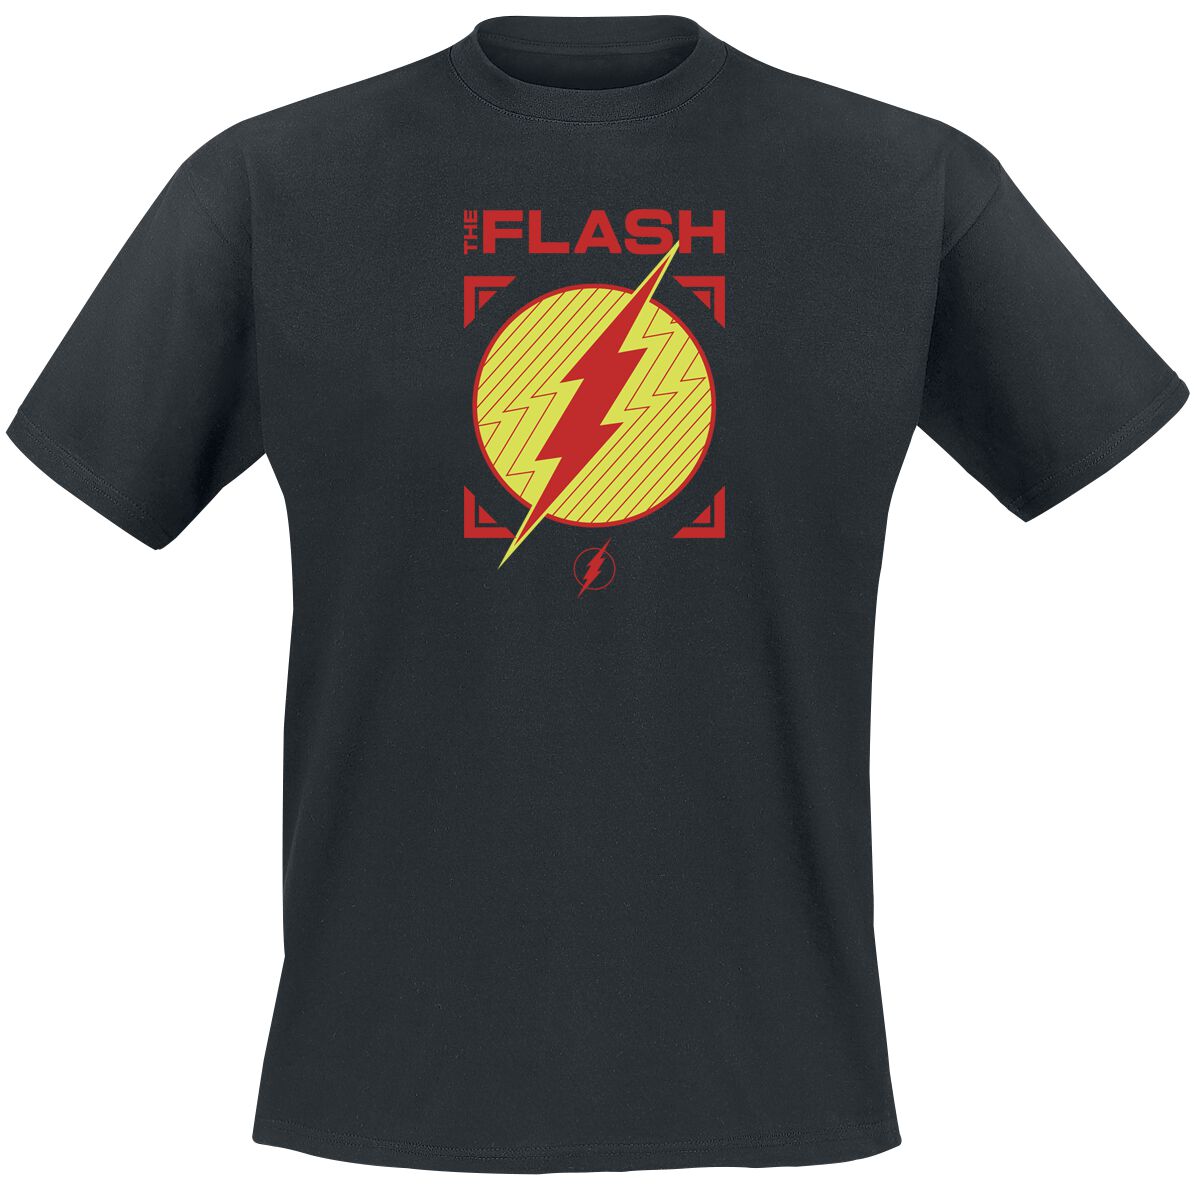 The Flash Flash - Central City All Stars T-Shirt schwarz in L